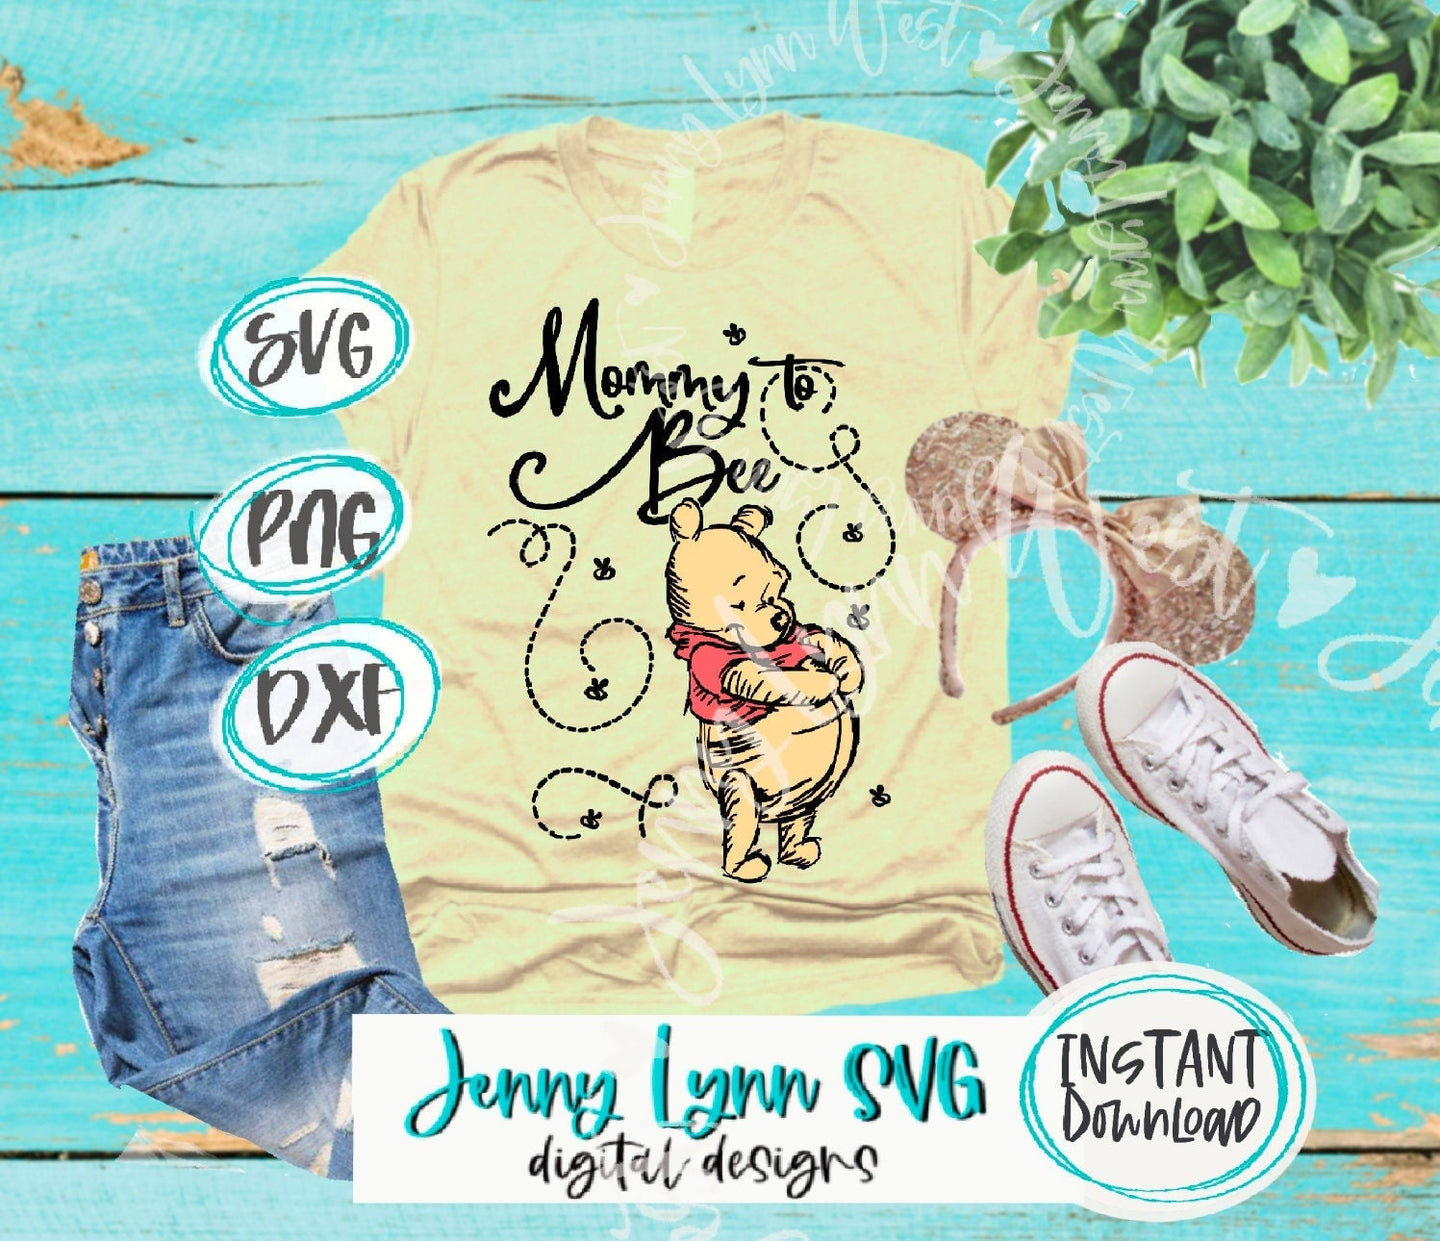 Winnie the Pooh SVG PNG Dxf Mommy to Be Pooh Sketched Silhouette Cricut Cut File Baby Shower Winnie the Pooh Iron On Sublimation dxf png svg